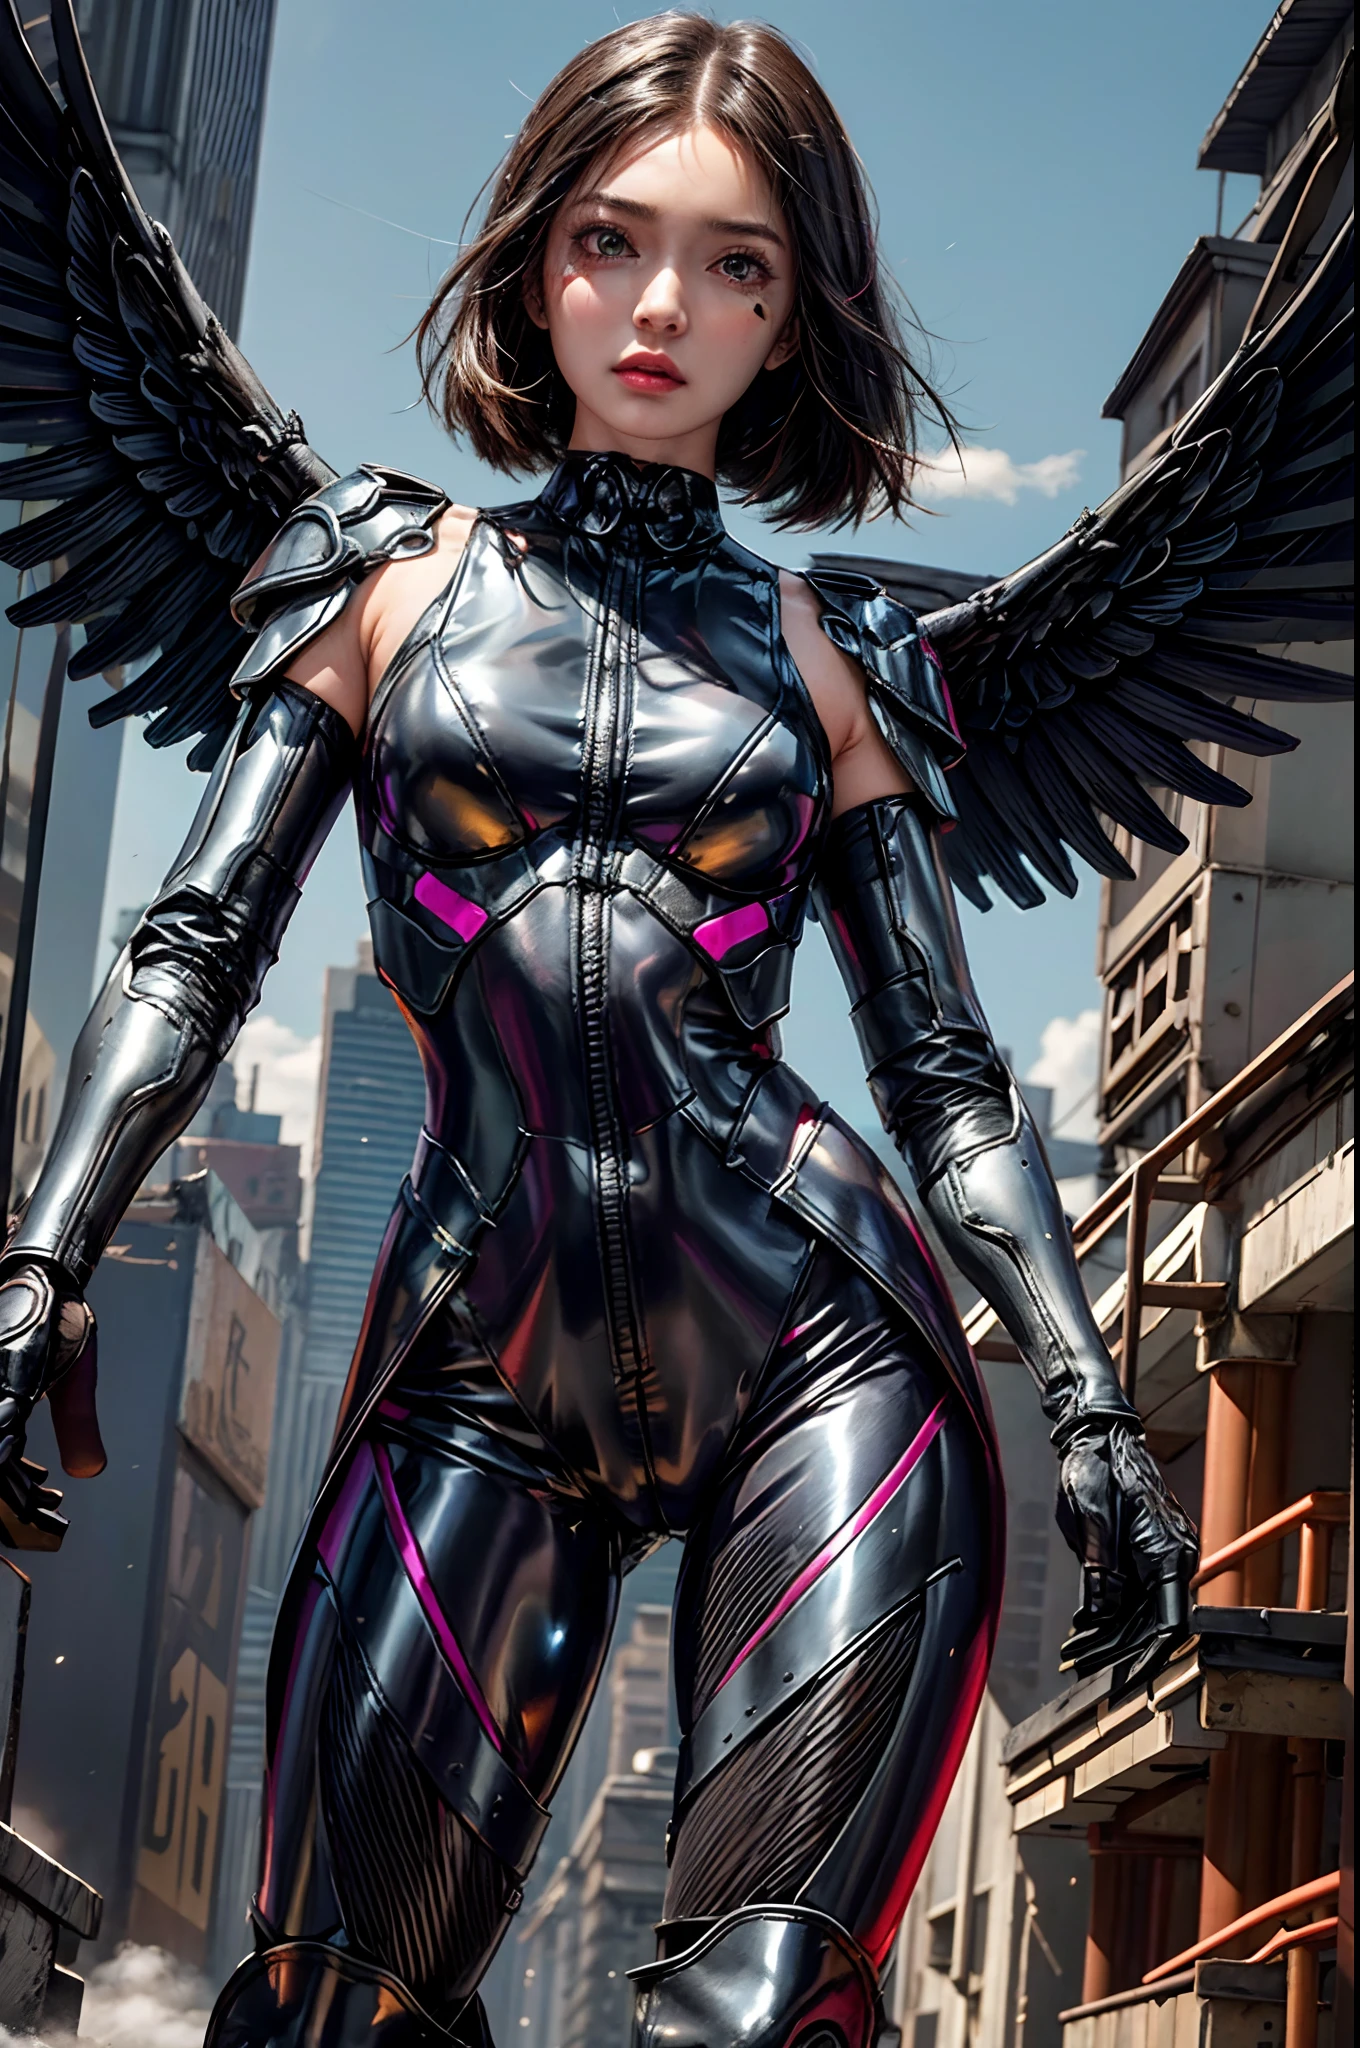 (8K), Highly detailed face,Masterpiece, Pretty girl, Huge black cyborg wings, The wings have neon lights, Wings spread,, Wear tight metal armor, Metal belt, Electronic armor elements, 20yr old, The skin under the suit has glowing lines, Shoulder-length black hair, cyborg eye, Standing upright, Serious expression, Cinematic lighting, Burning cyberpunk city in the distance, Flat chest，tightsuit，extreme hight detail，tmasterpiece